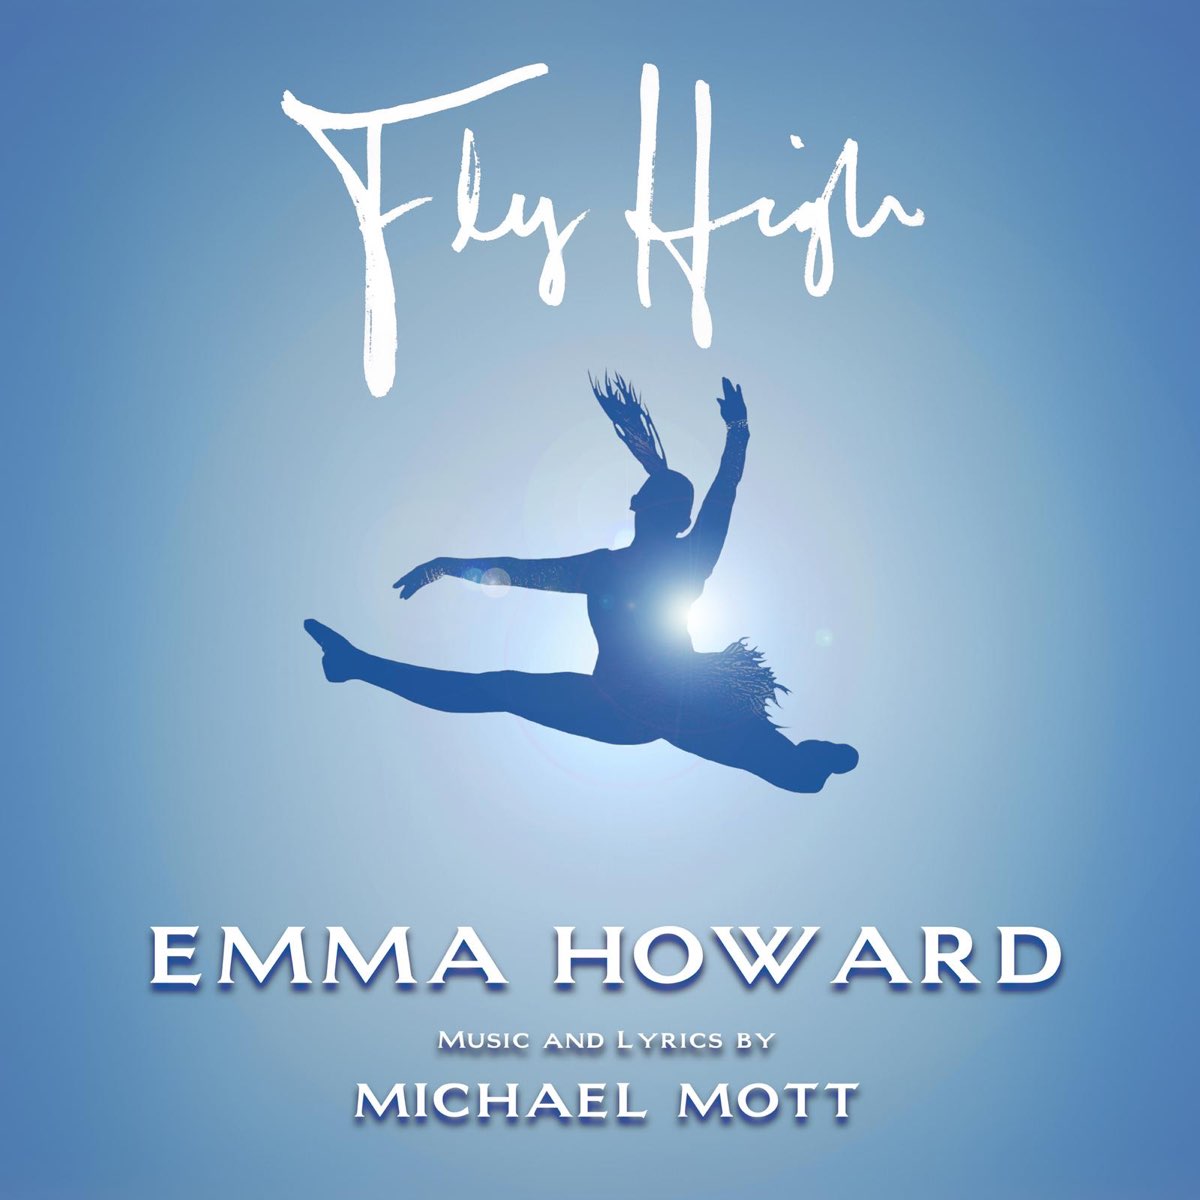 Flying higher and higher. Fly High песни. Fly песня. Flying High. Fly High Music show.